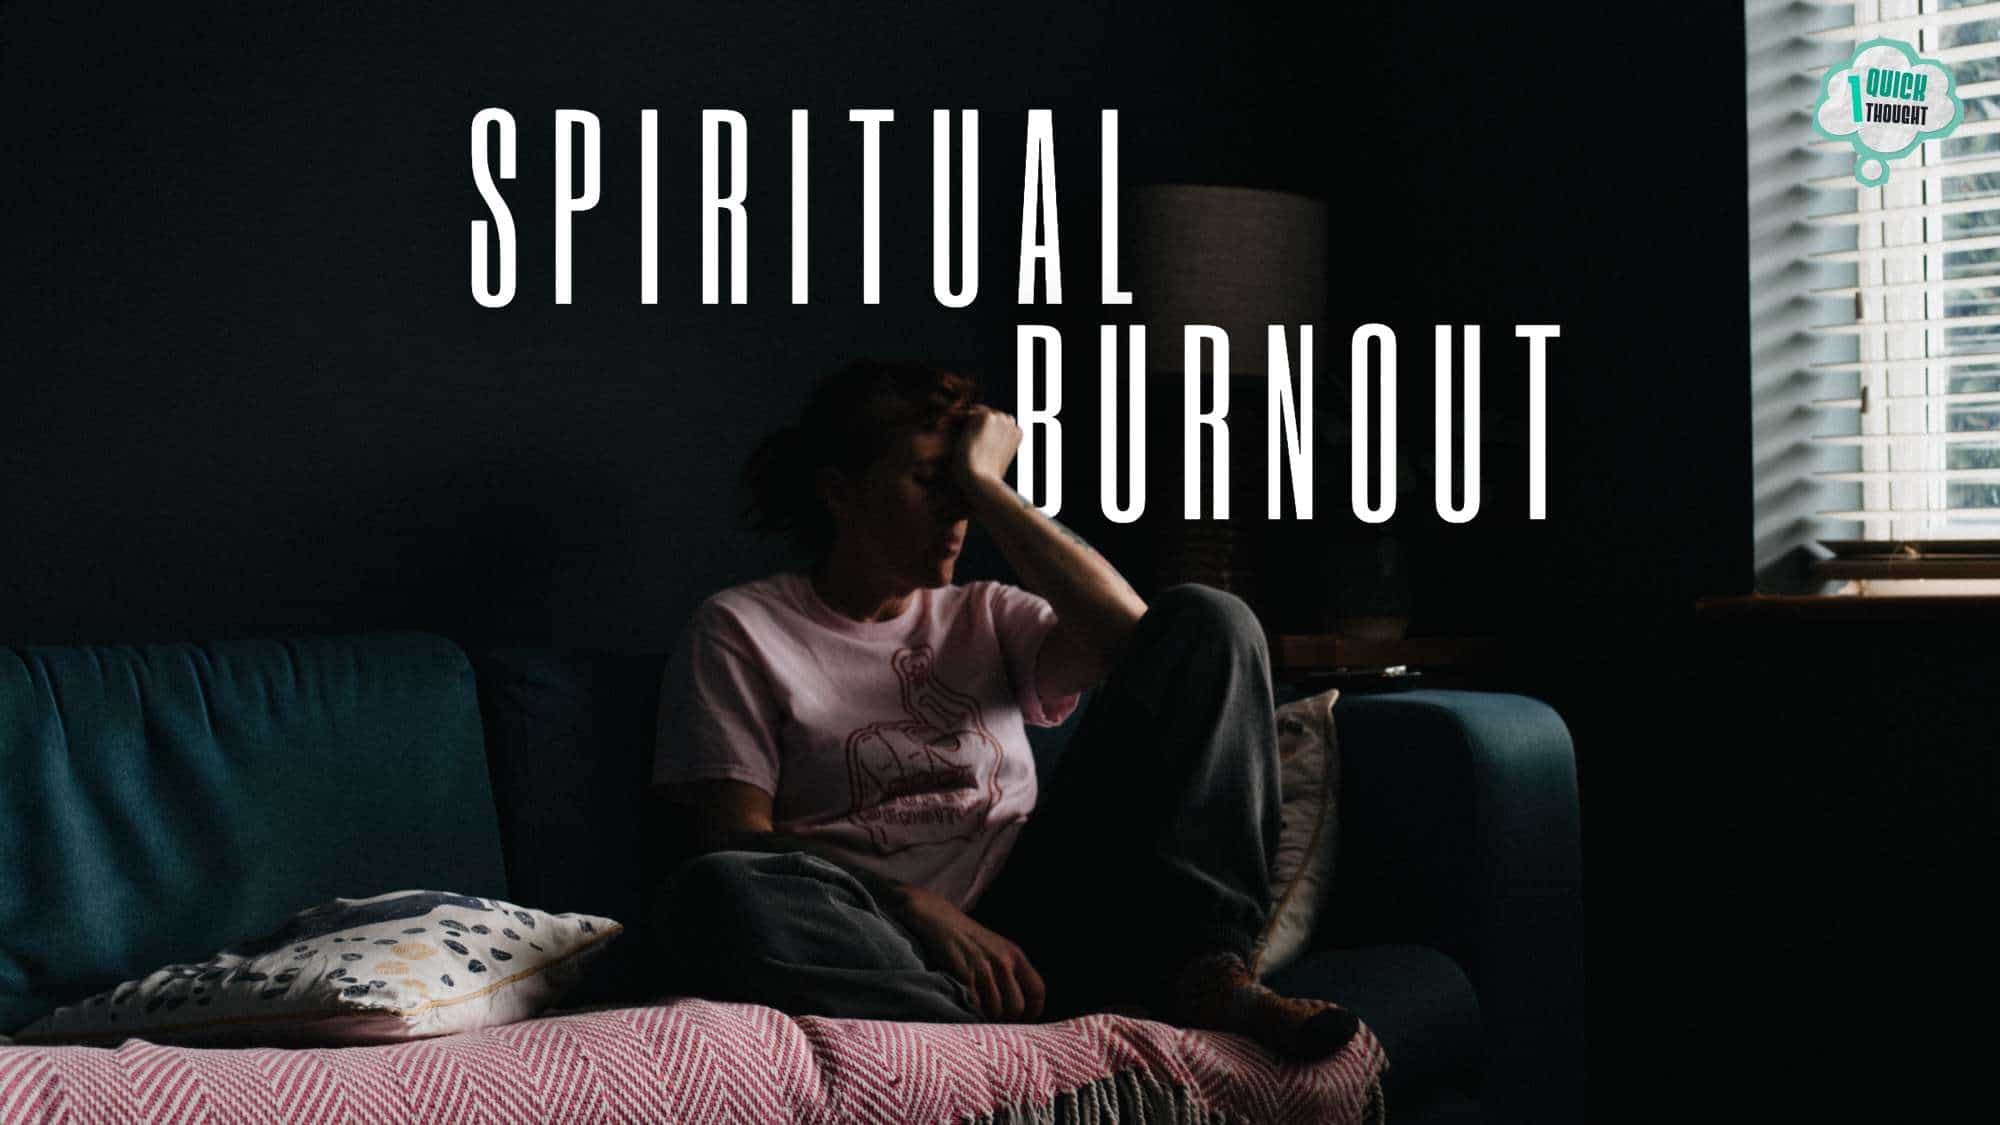 One Quick Thought: How to Get Out of a Spiritual Burnout 13